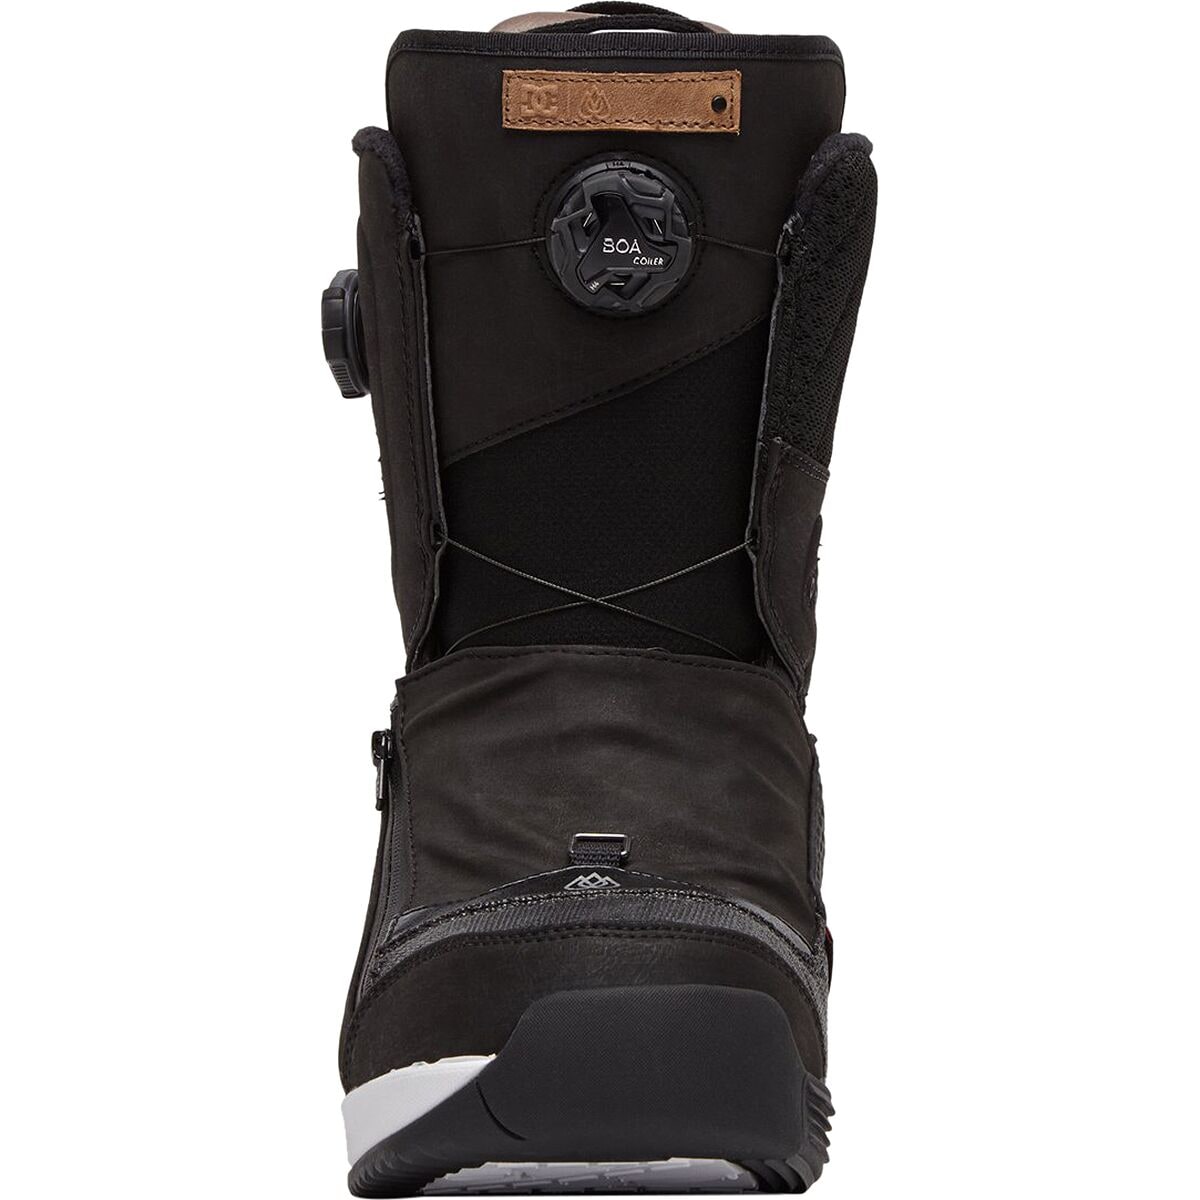 dc travis rice mountain boots